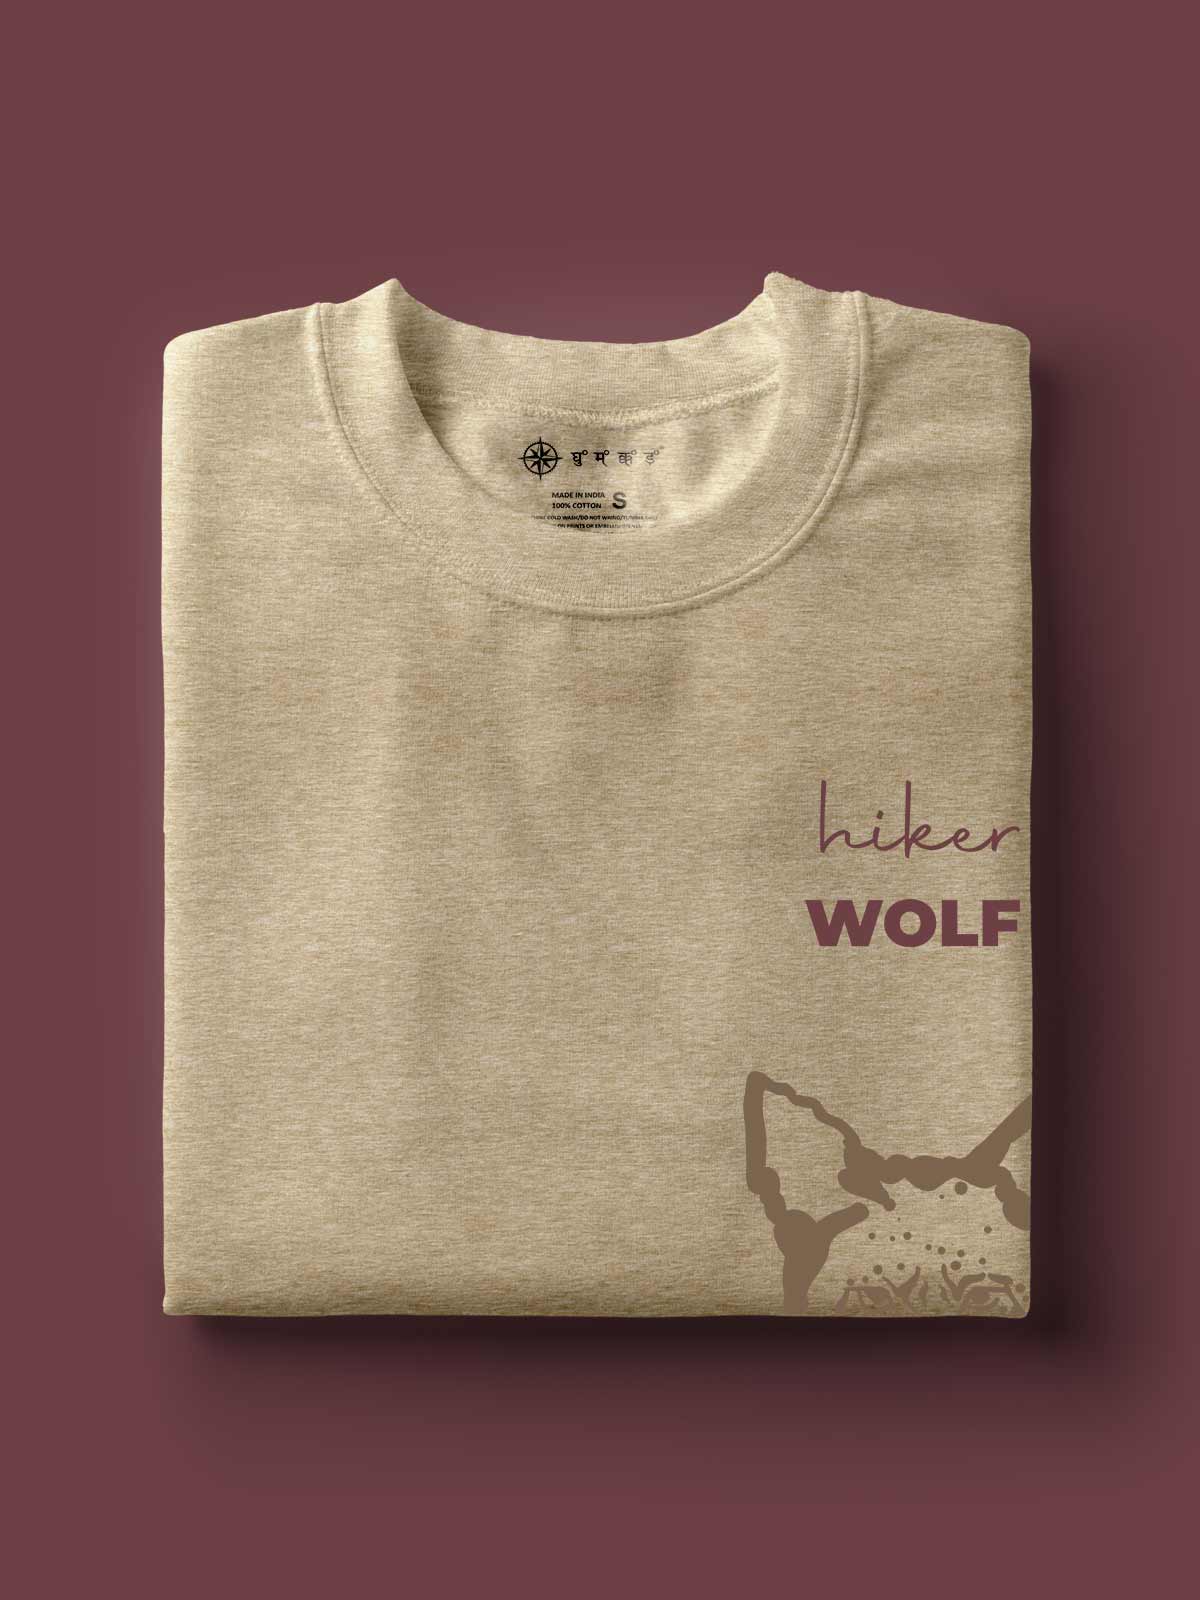 Hiker-wolf-printed-t-shirt-for-men by Ghumakkad